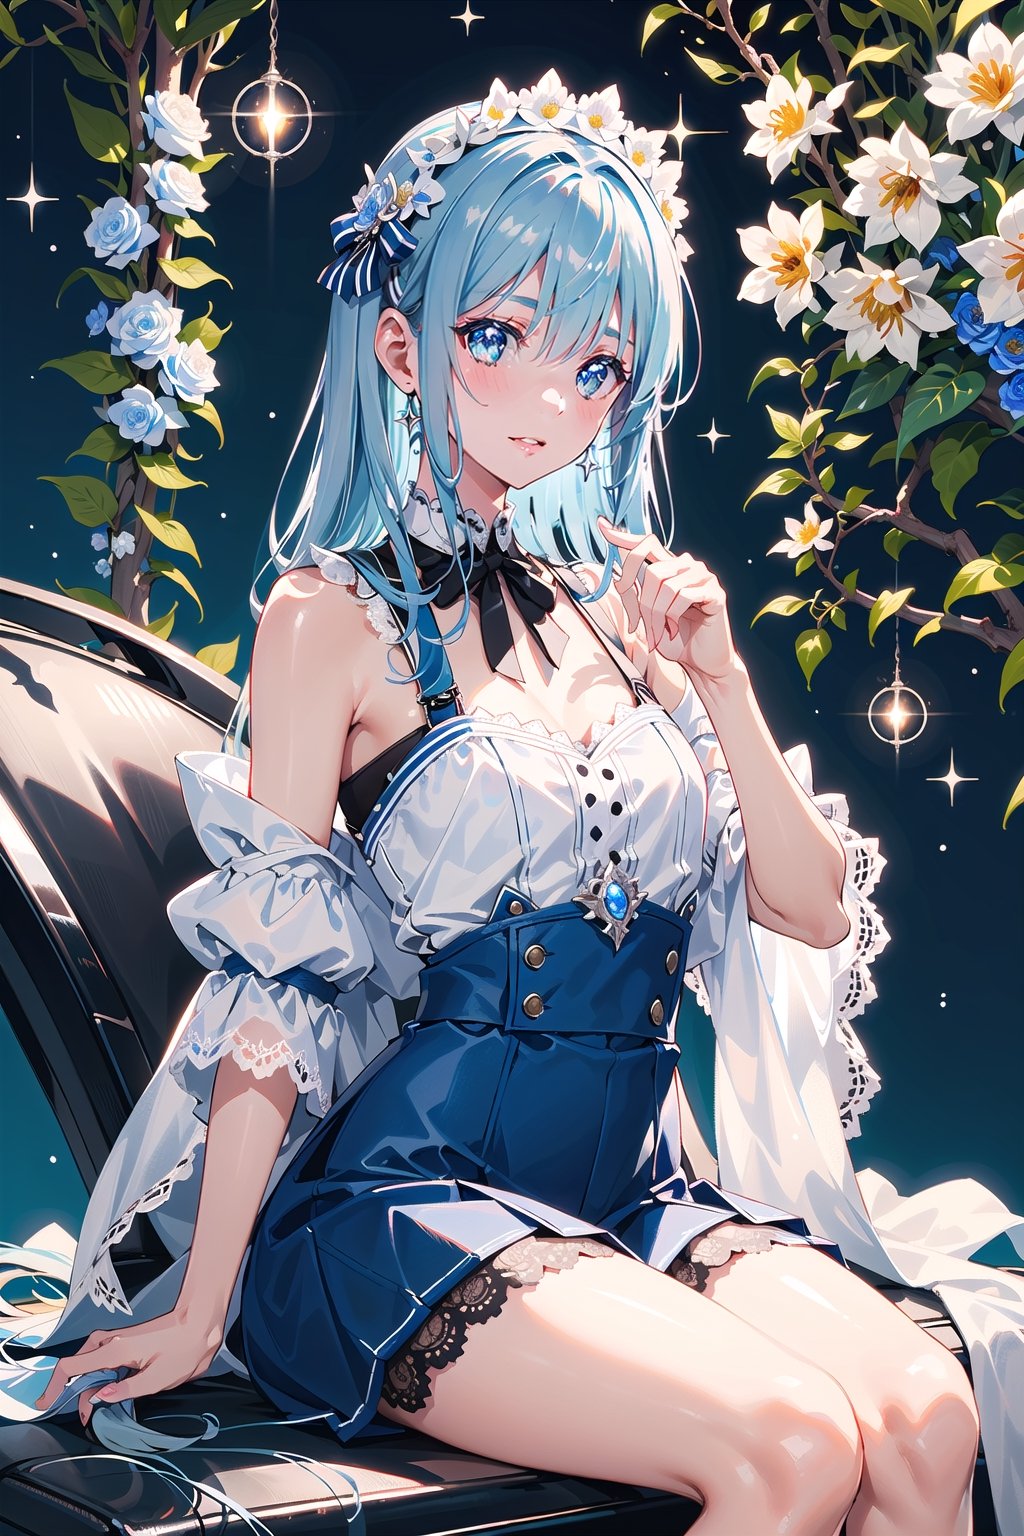 masterpiece, best quality, 1 girl, flowers, floral background, nature, pose, perfect hands, modern outfit, detailed, sparkling, sitting, lace detail, long hair, ultra detailed, ultra detailed face, clear eyes, good lighting, pale blue hair, blue eyes, lace hairpiece, perfect hands, smaller hands